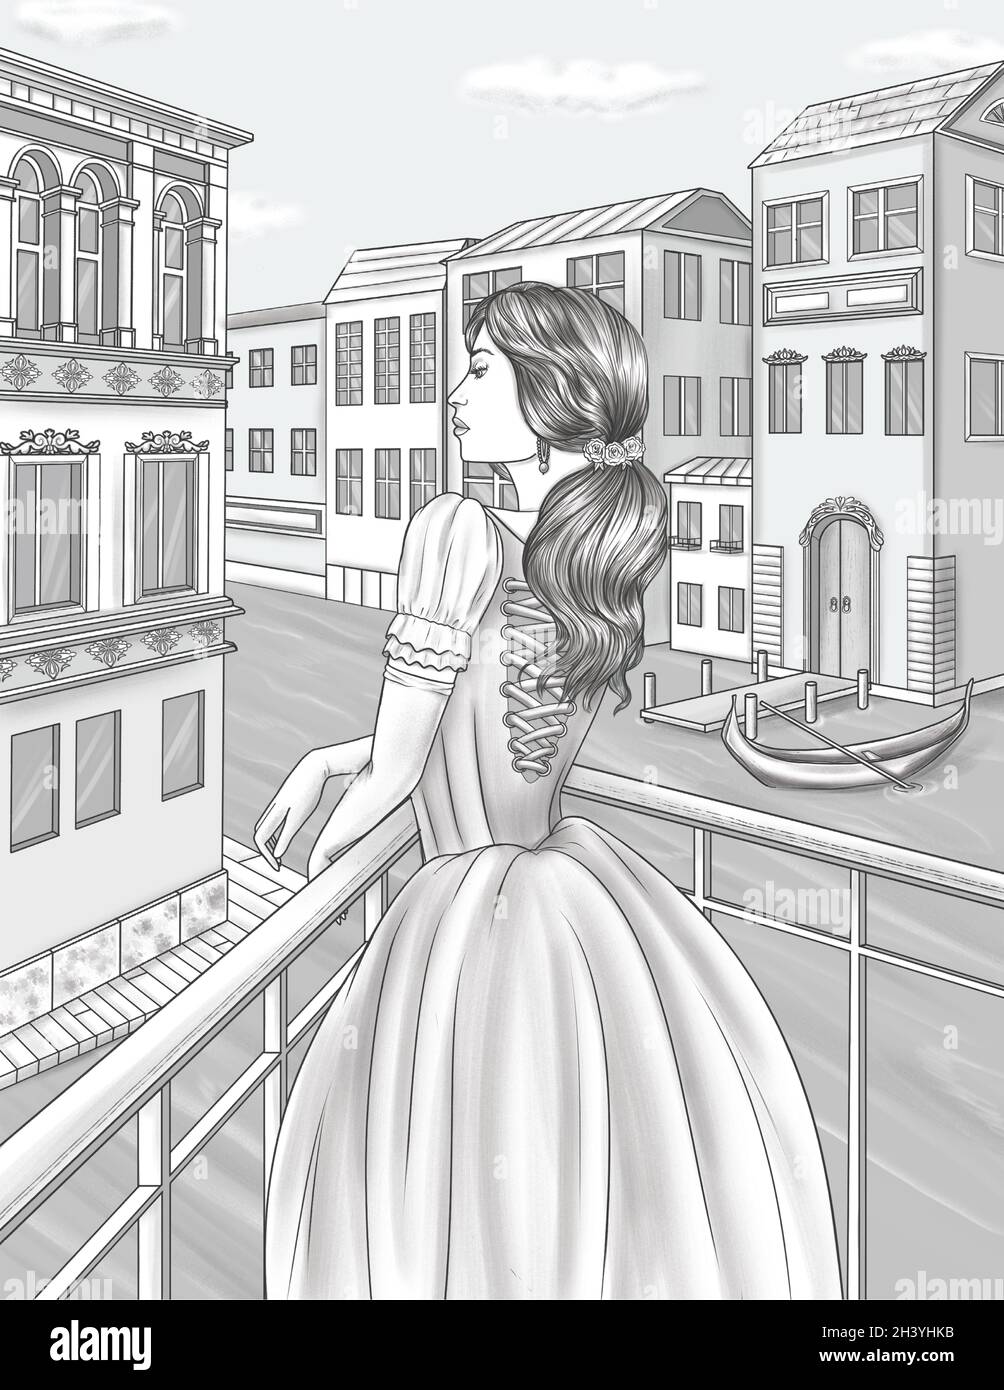 Lady In Dress Standing On Balcony Viewing Water Canal Colorless Line Drawing. Woman In Gown With Long Hair Stands On Veranda Loo Stock Photo